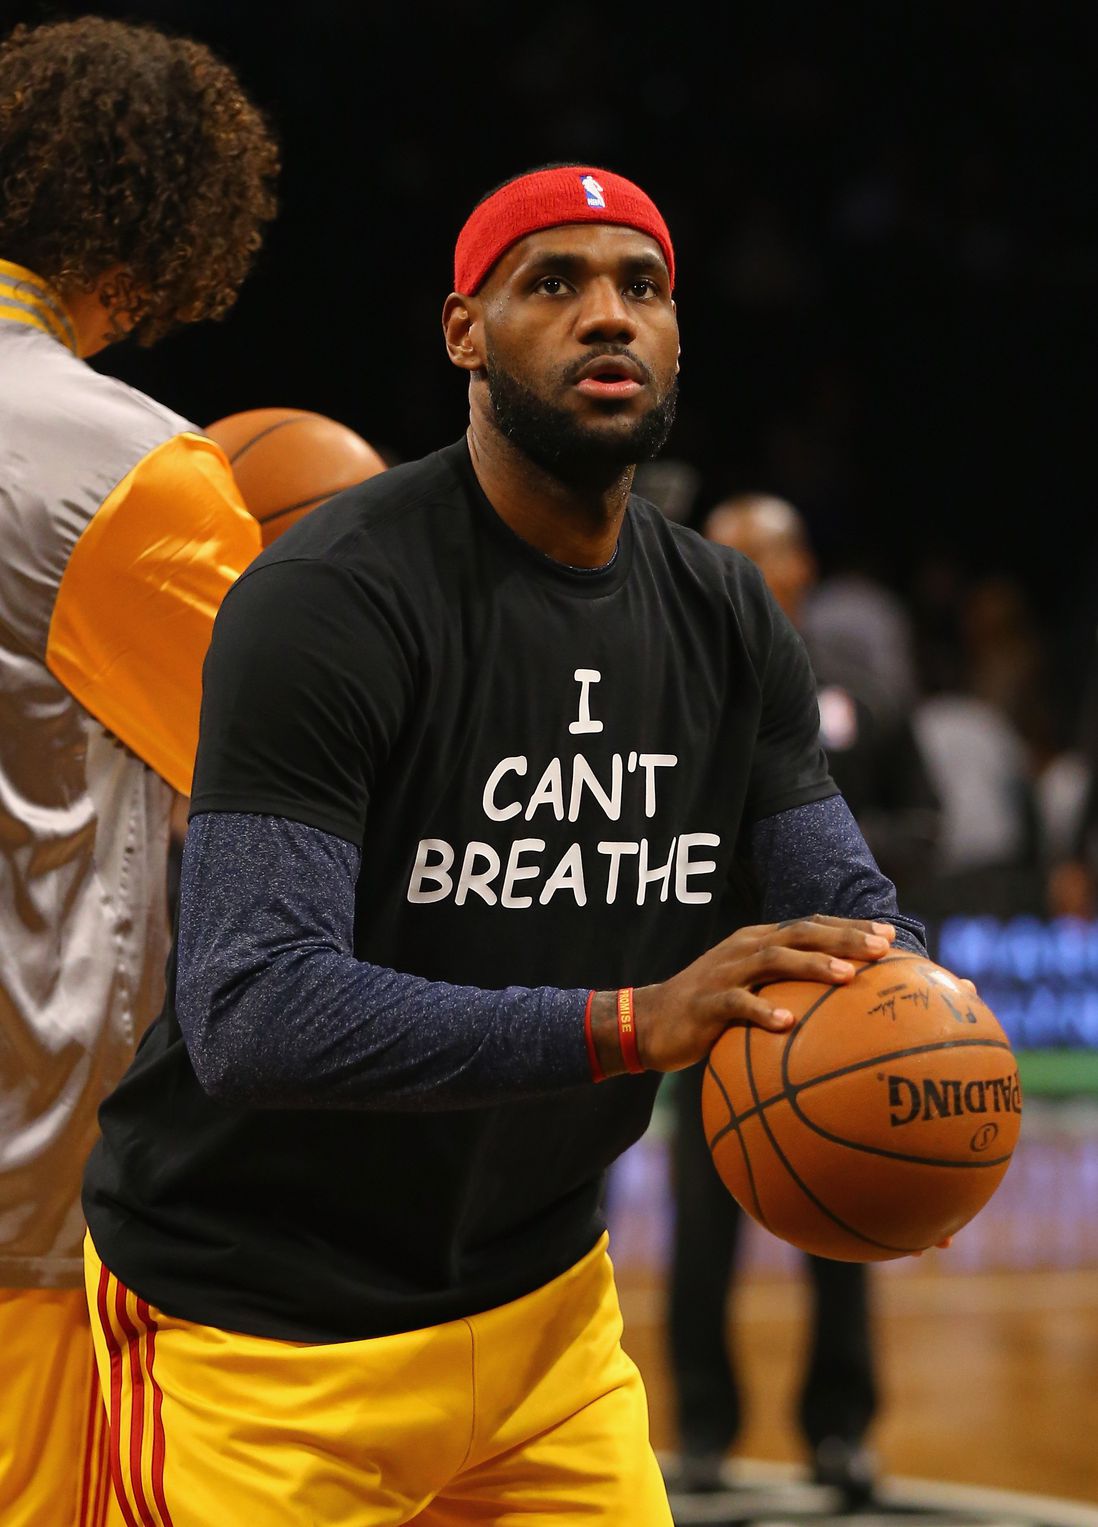 We wonder if the Cambridges saw LeBron in his "I Can't Breathe" t-shirt during warm-up<br/>